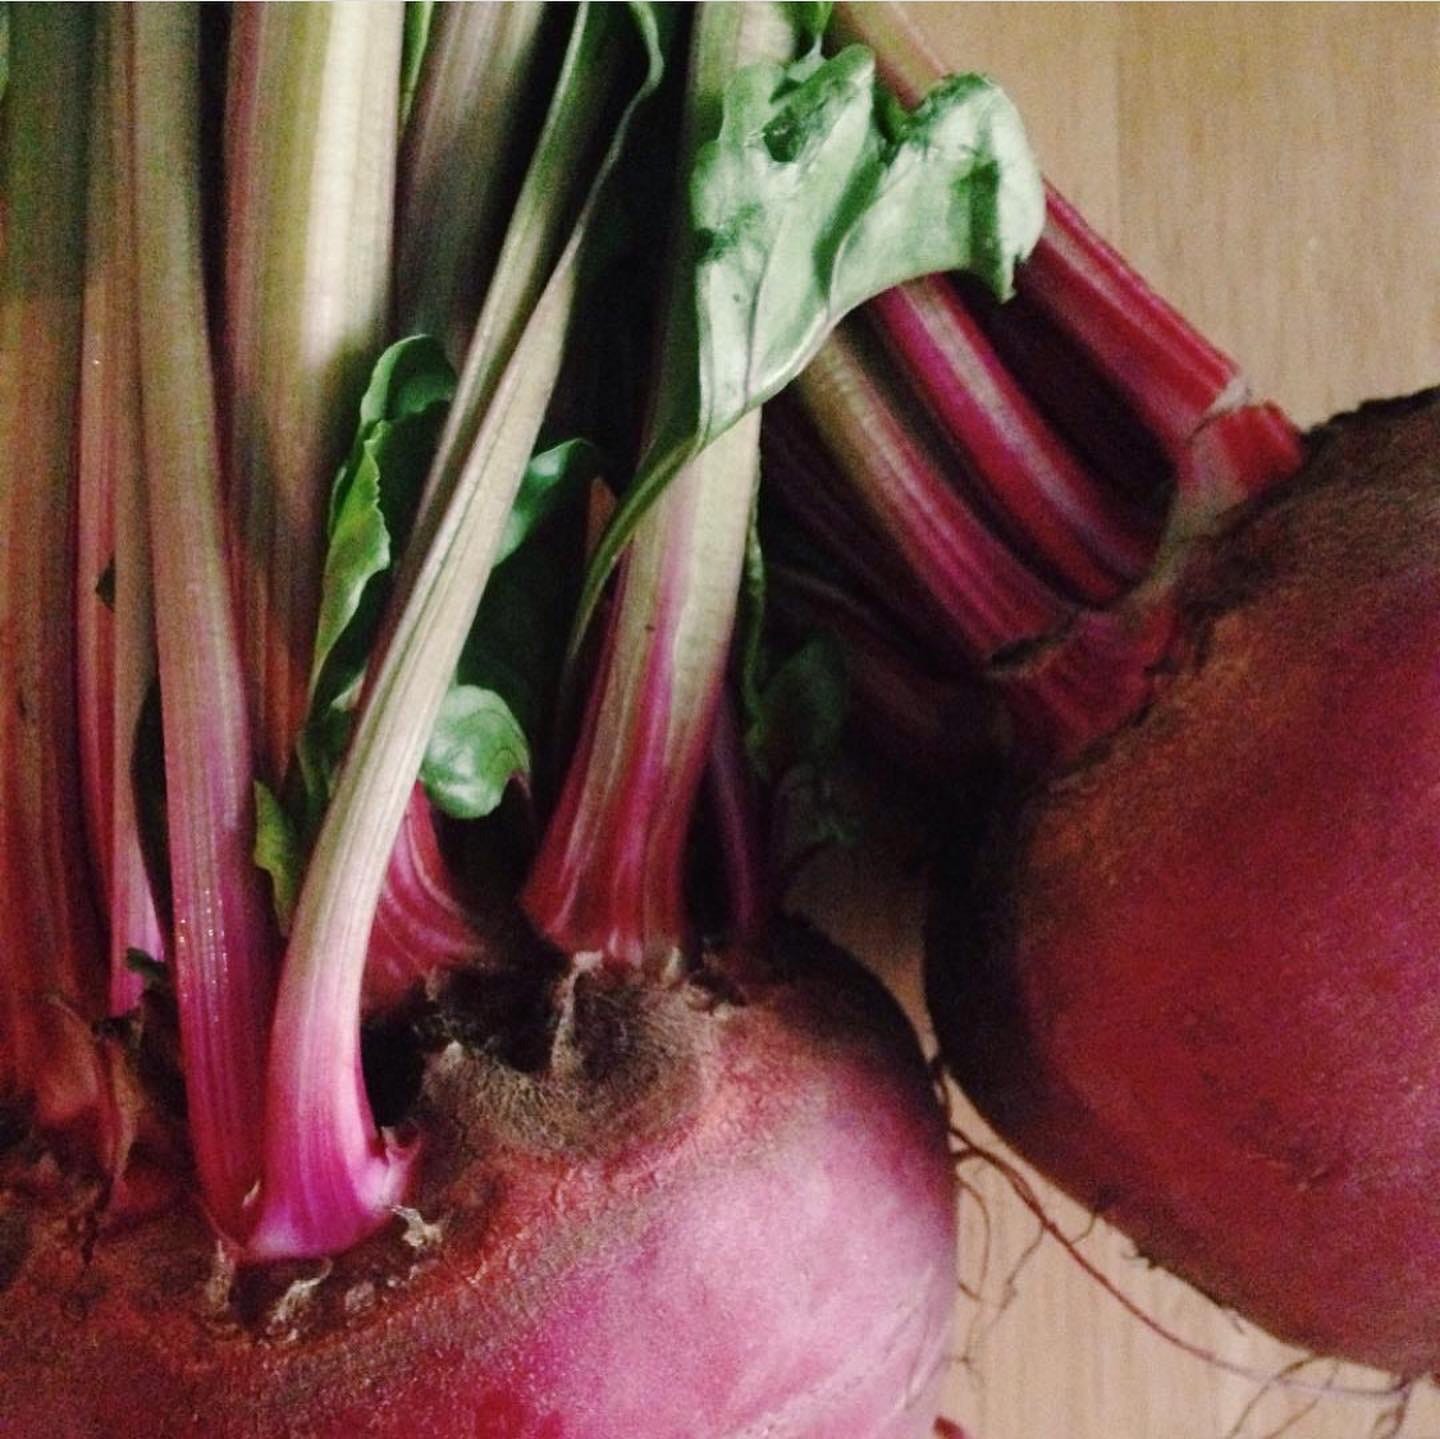 a close up shot of red beets and their green stems